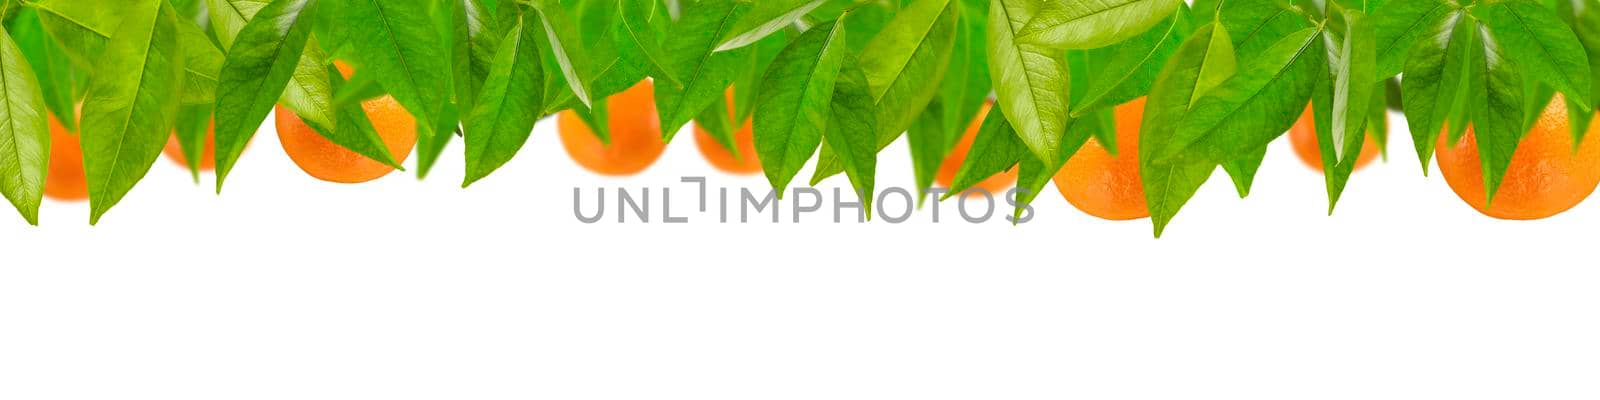 Tangerines in leaves are arranged in a row on a white background. Mandarin tree leaves with tangerines for label printing or design by SERSOL